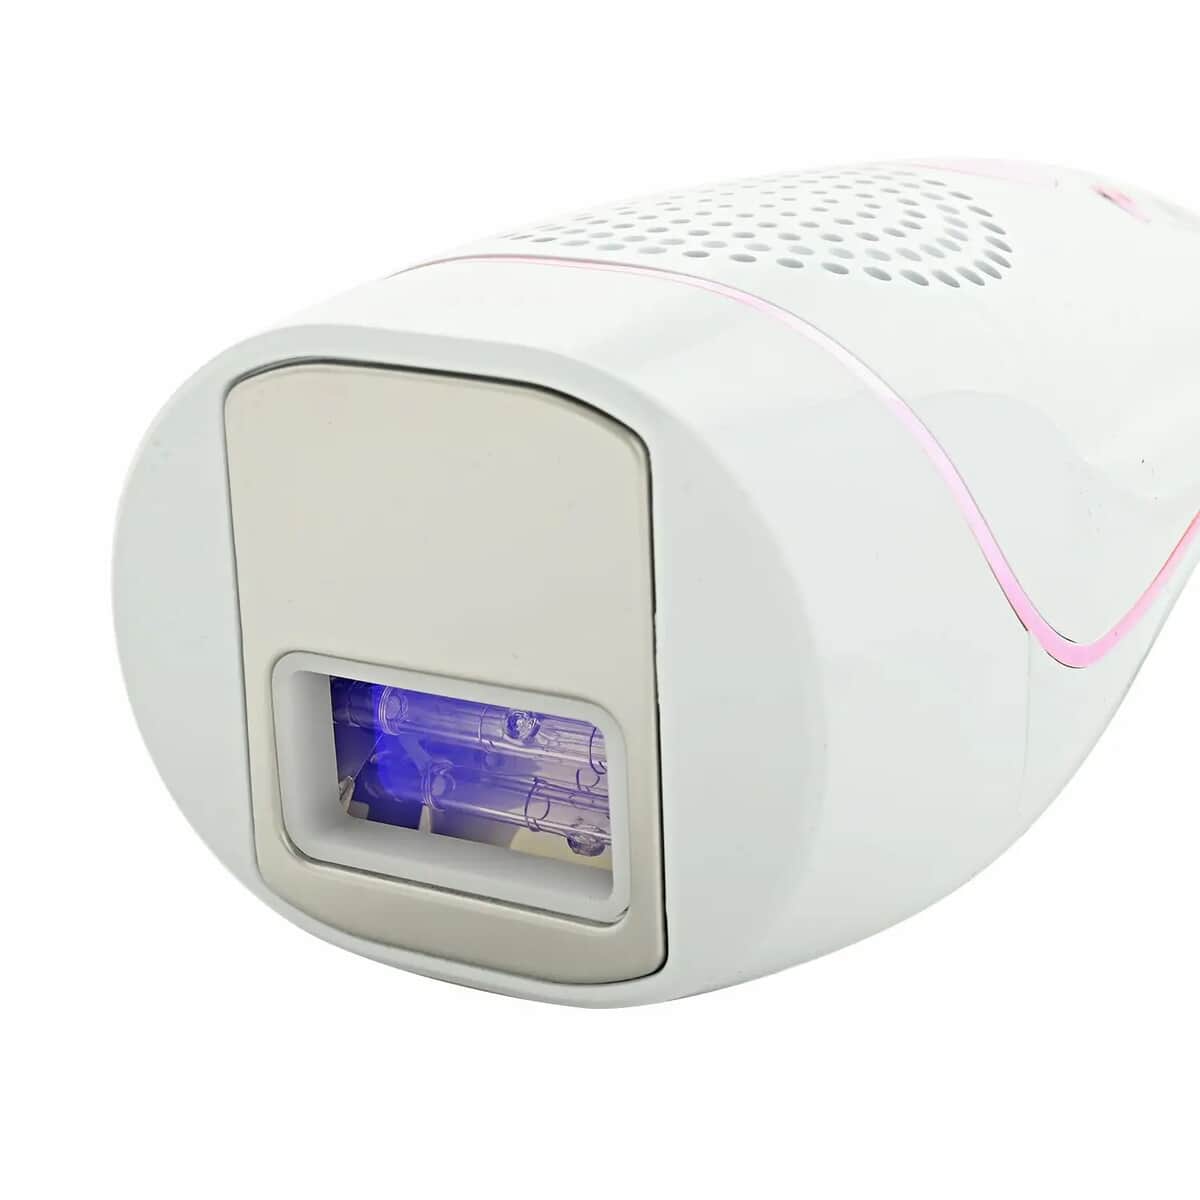 Luna'Mour ICE Cool IPL Hair Removal Device & Photofacial image number 6